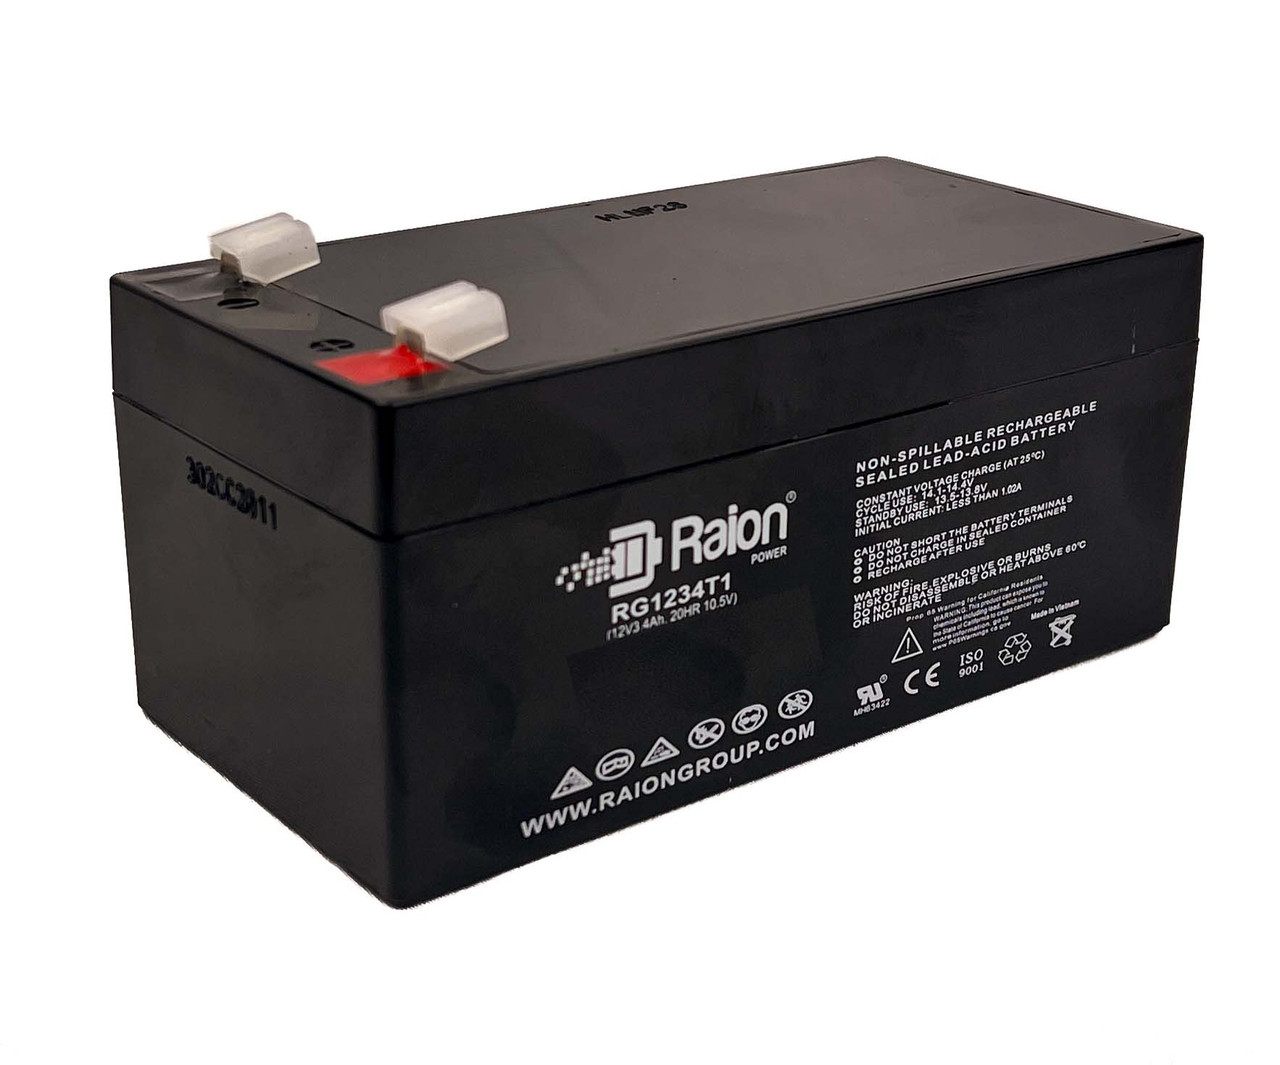 Raion Power 12V 3.4Ah Non-Spillable Replacement Battery for LONG WP28-12